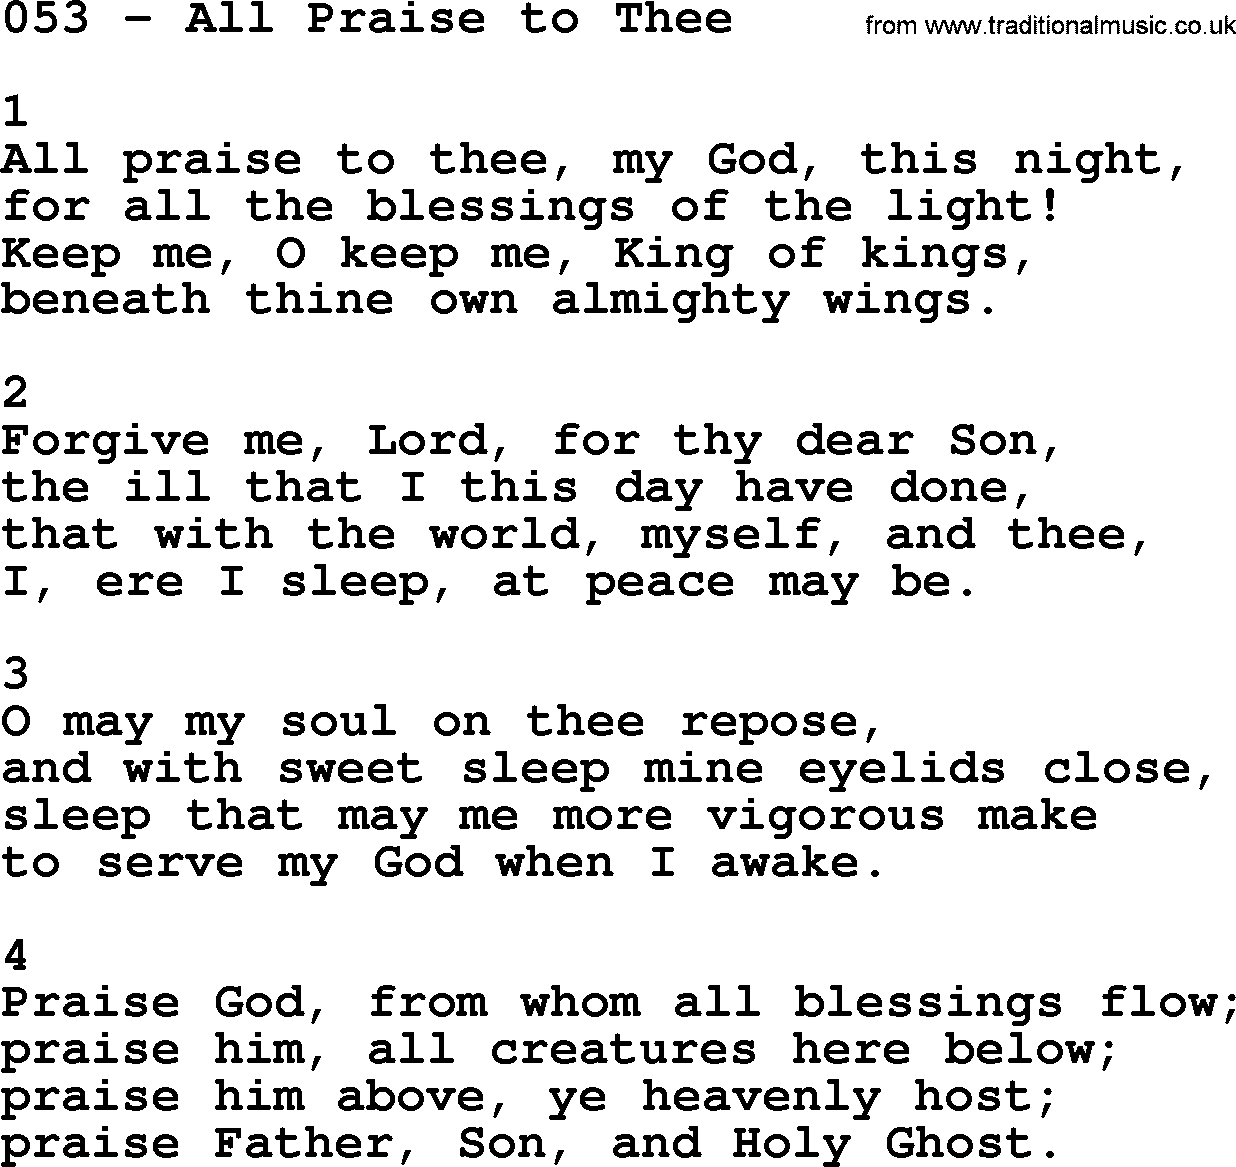 Complete Adventis Hymnal, title: 053-All Praise To Thee, with lyrics, midi, mp3, powerpoints(PPT) and PDF,